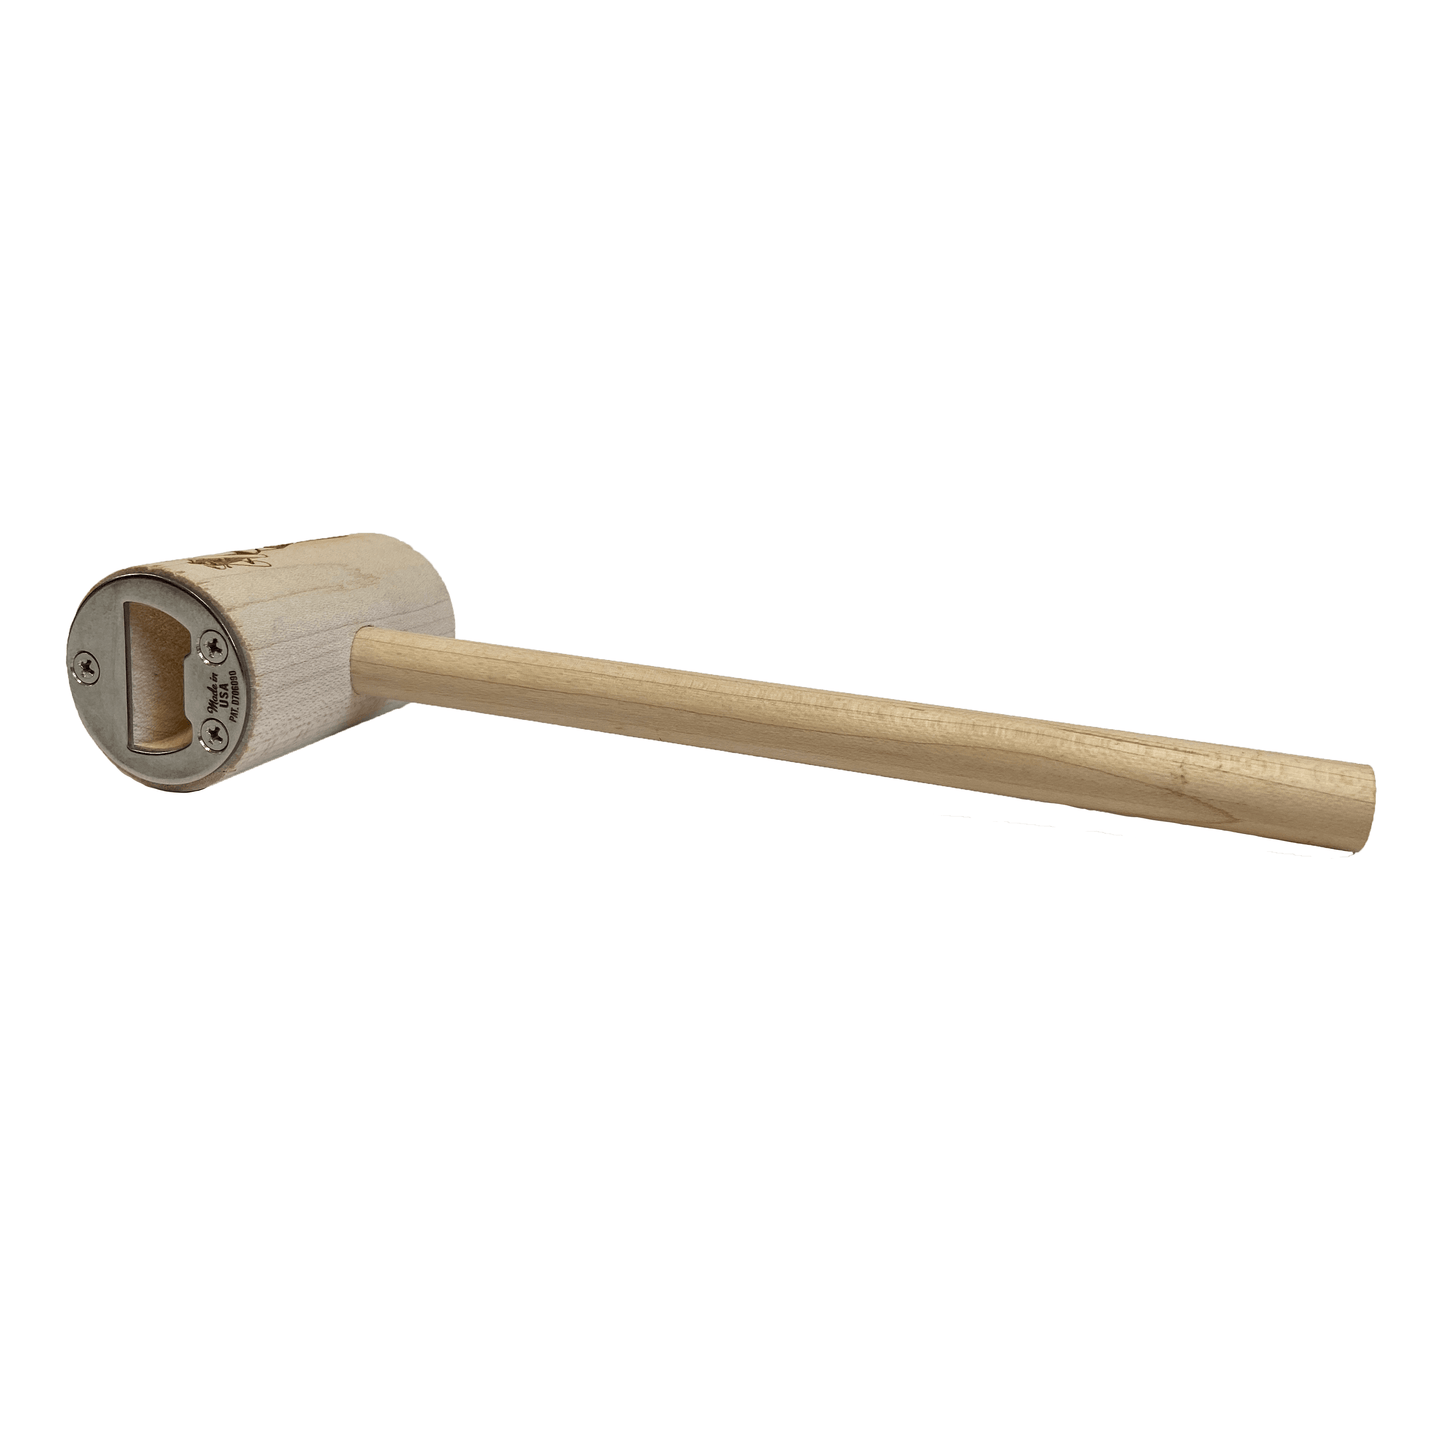 Flying Route One / Crab Mallet with Bottle Opener - Route One Apparel